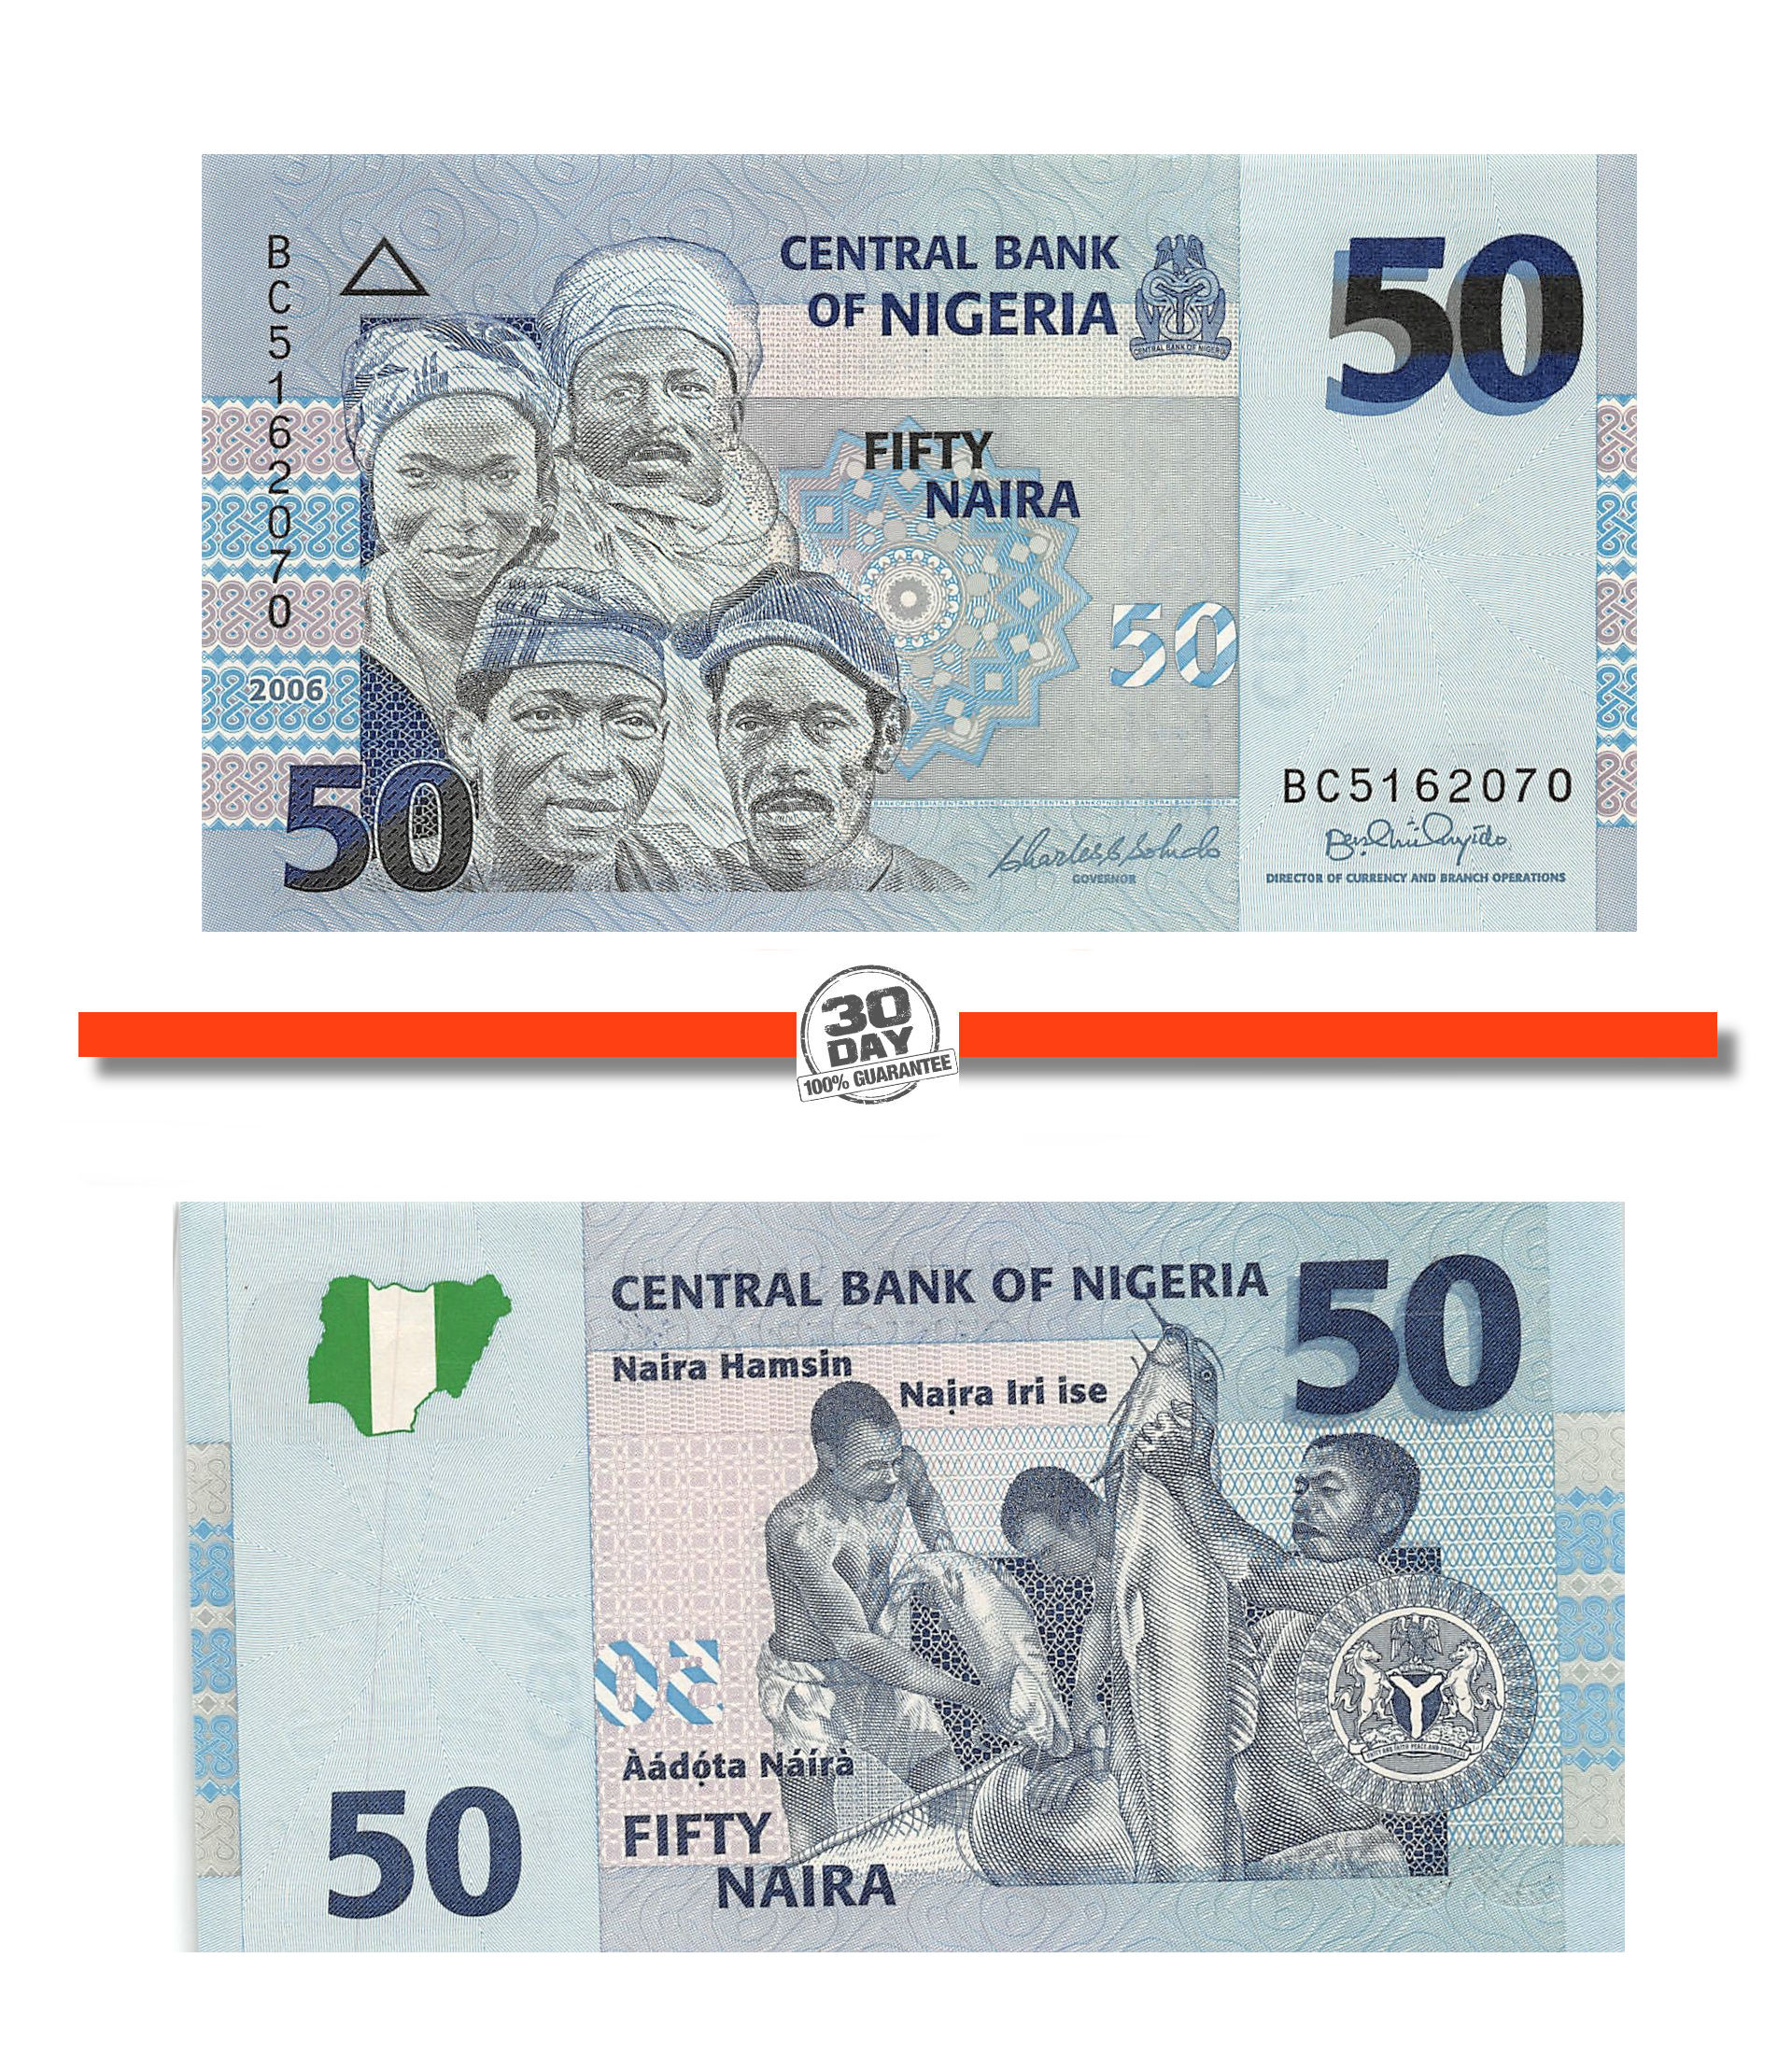 Details about   Nigeria 50 Naira 2006 Pick 35.a UNC Uncirculated Banknote 